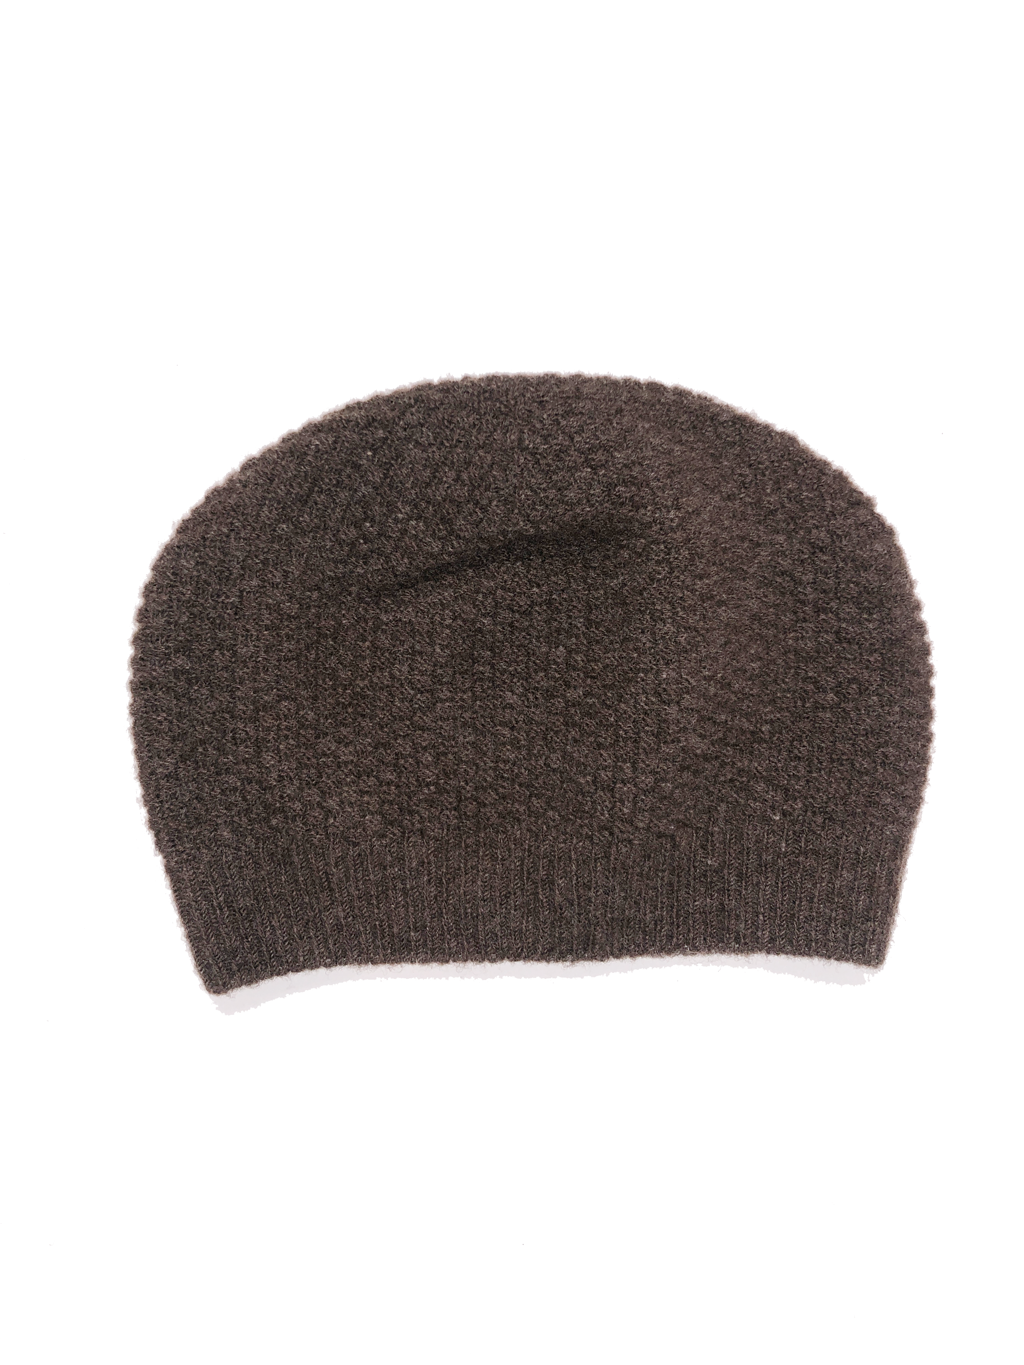 Knitted Cap - Chocolate